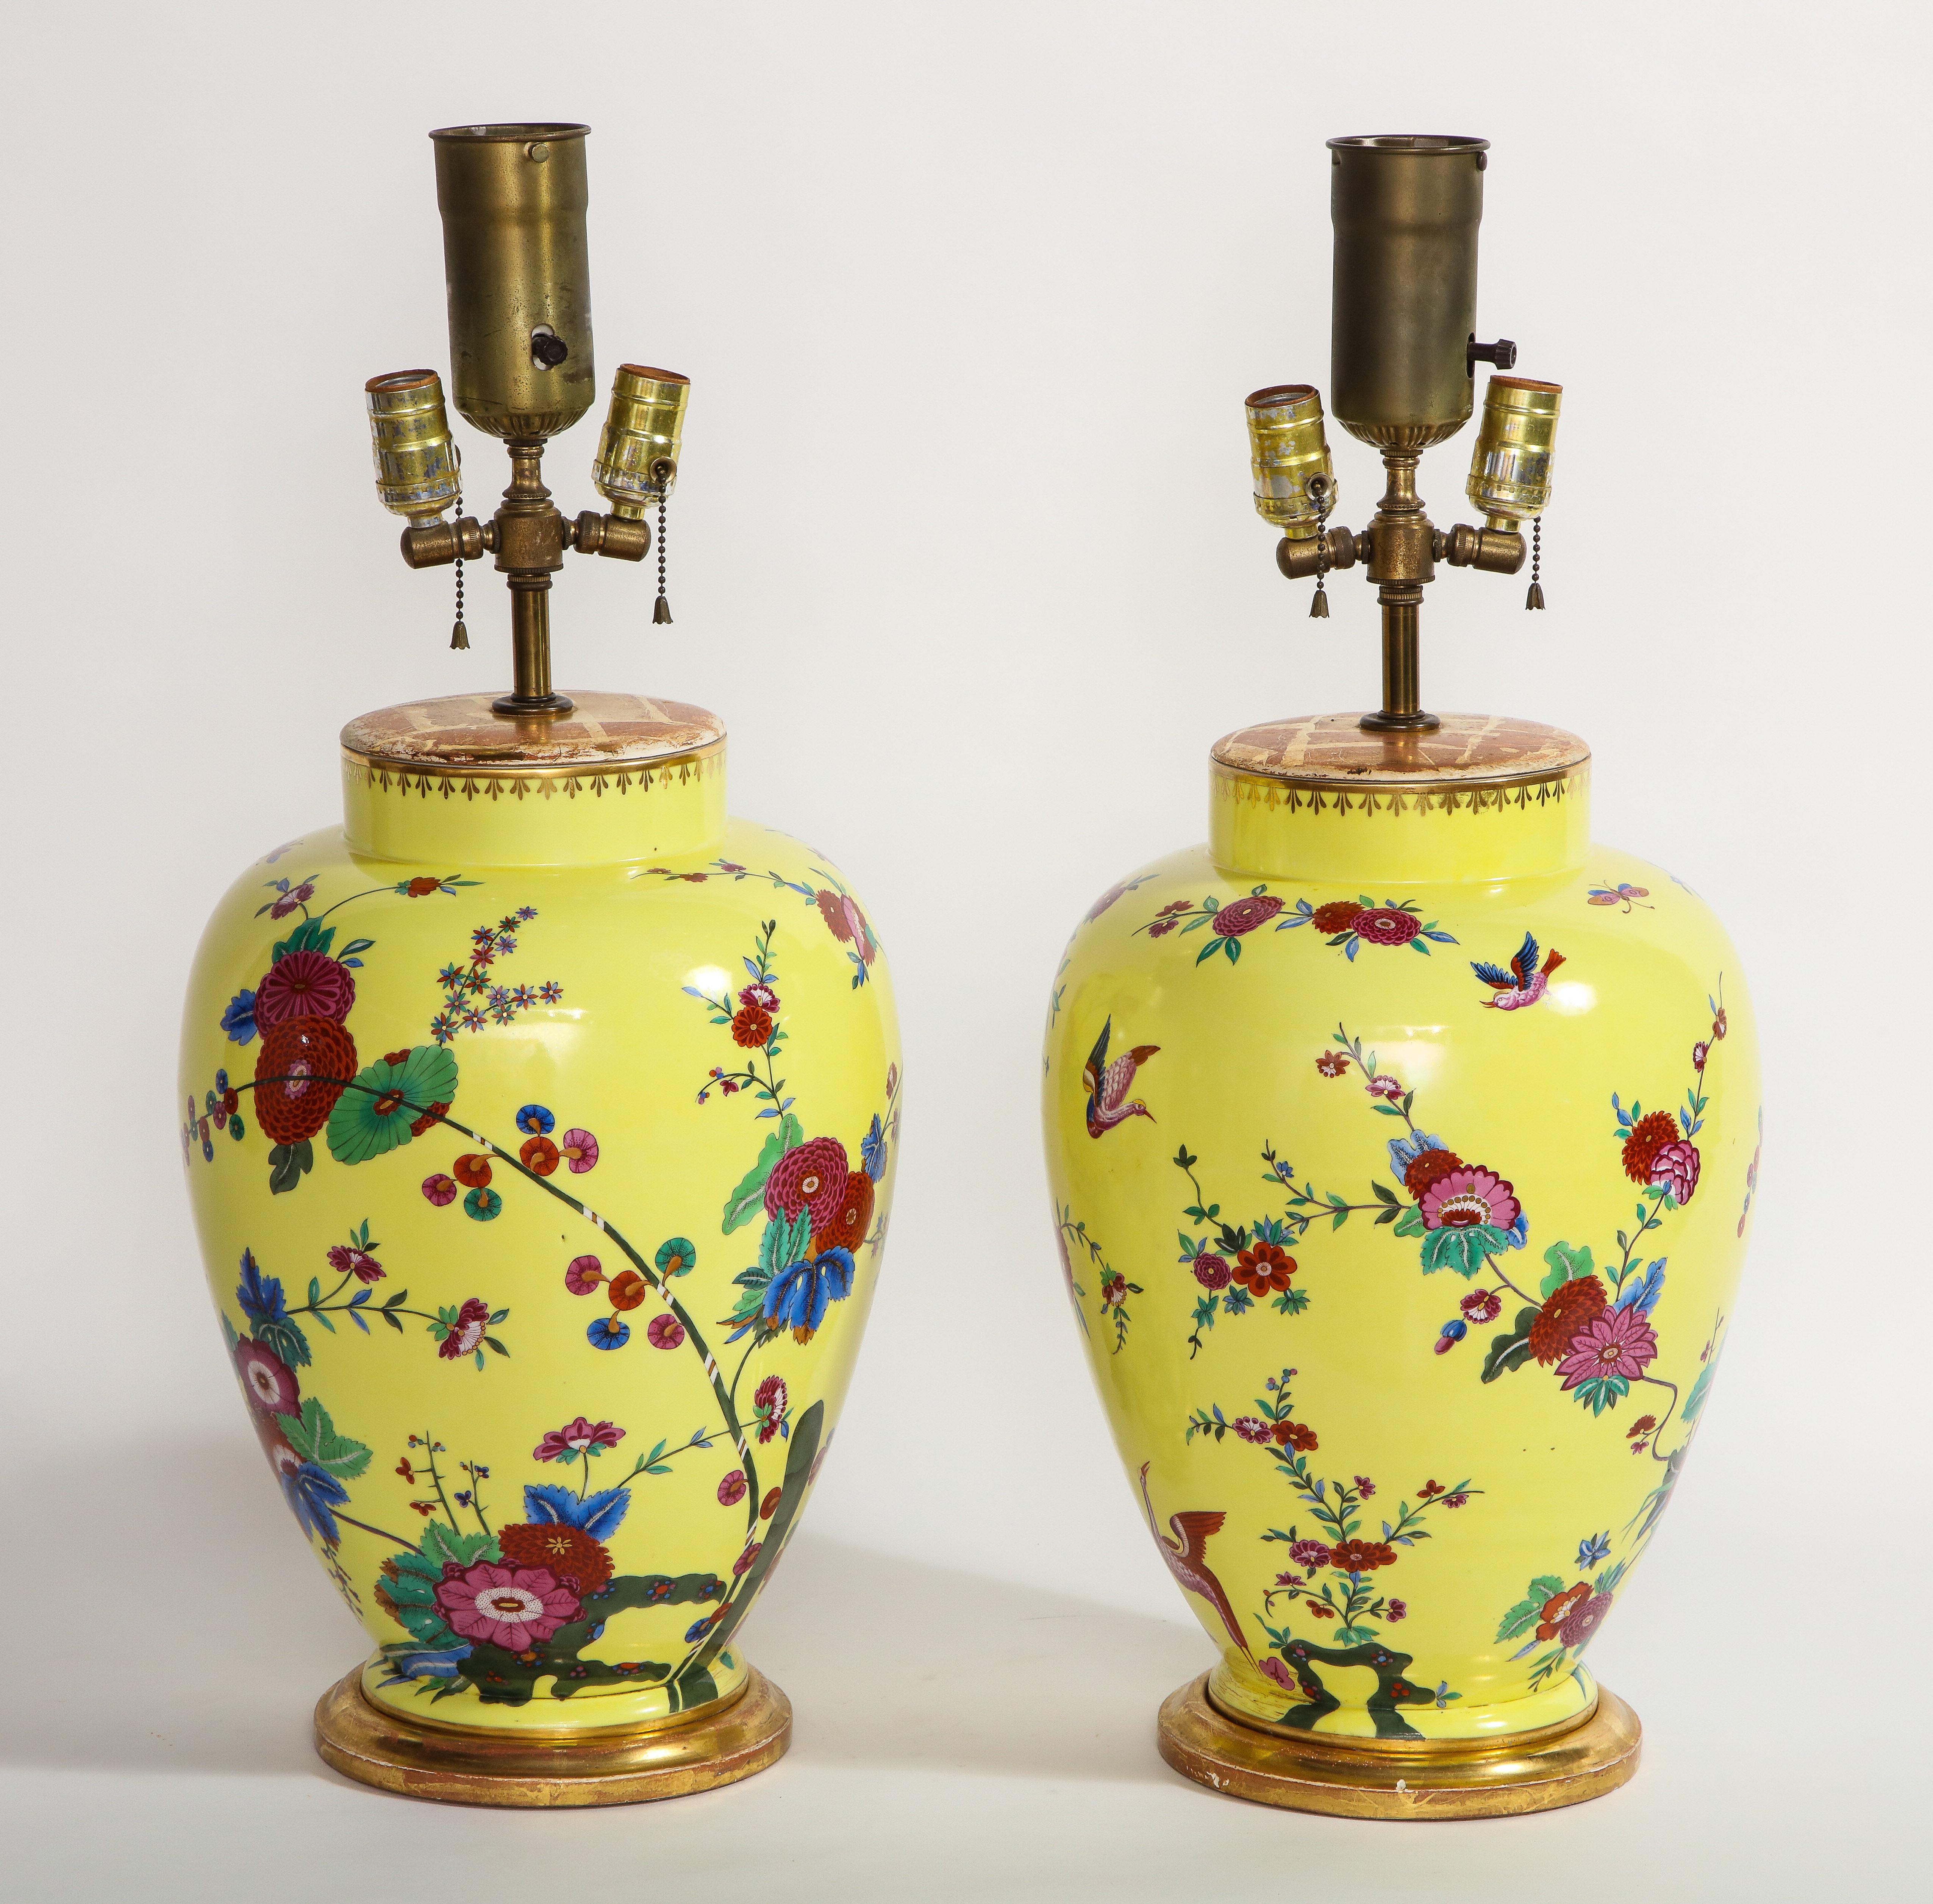 Chinese Export Pair of Yellow Ground German Porcelain Vases with Flower and Bird Decoration For Sale